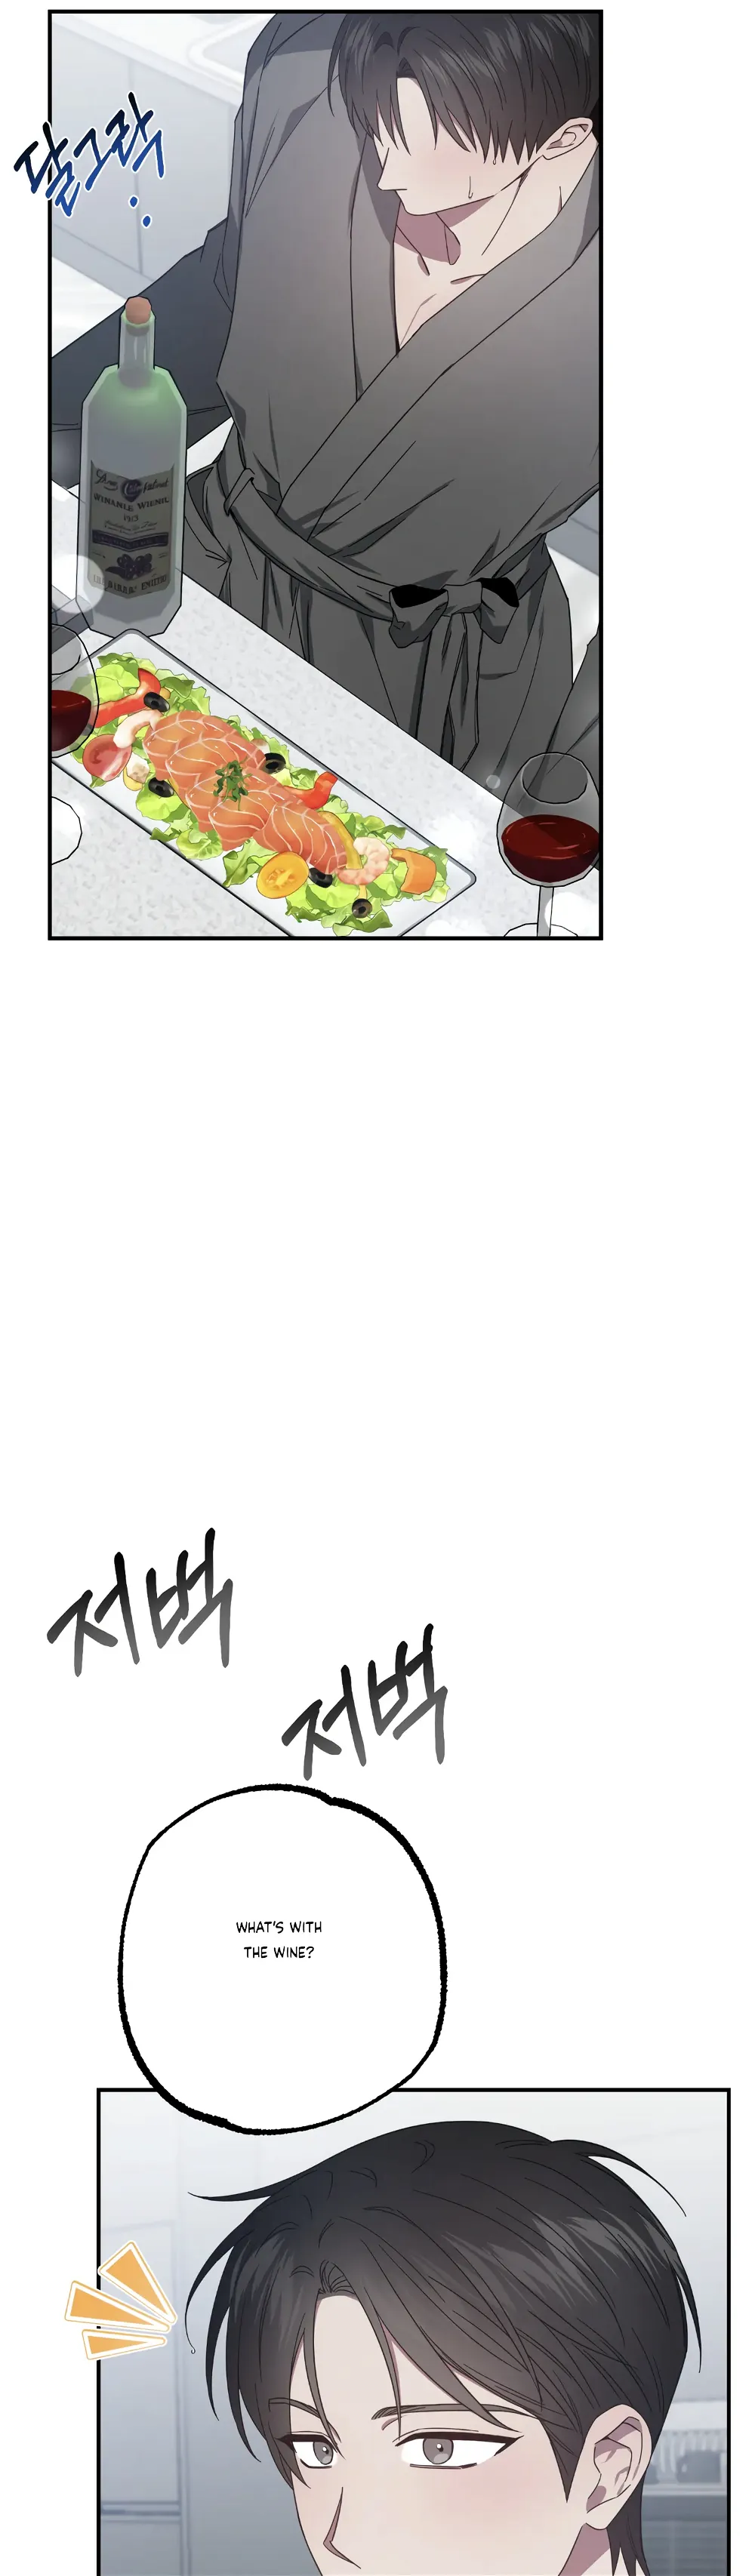 Mijeong’s Relationships chapter 35 - Page 2